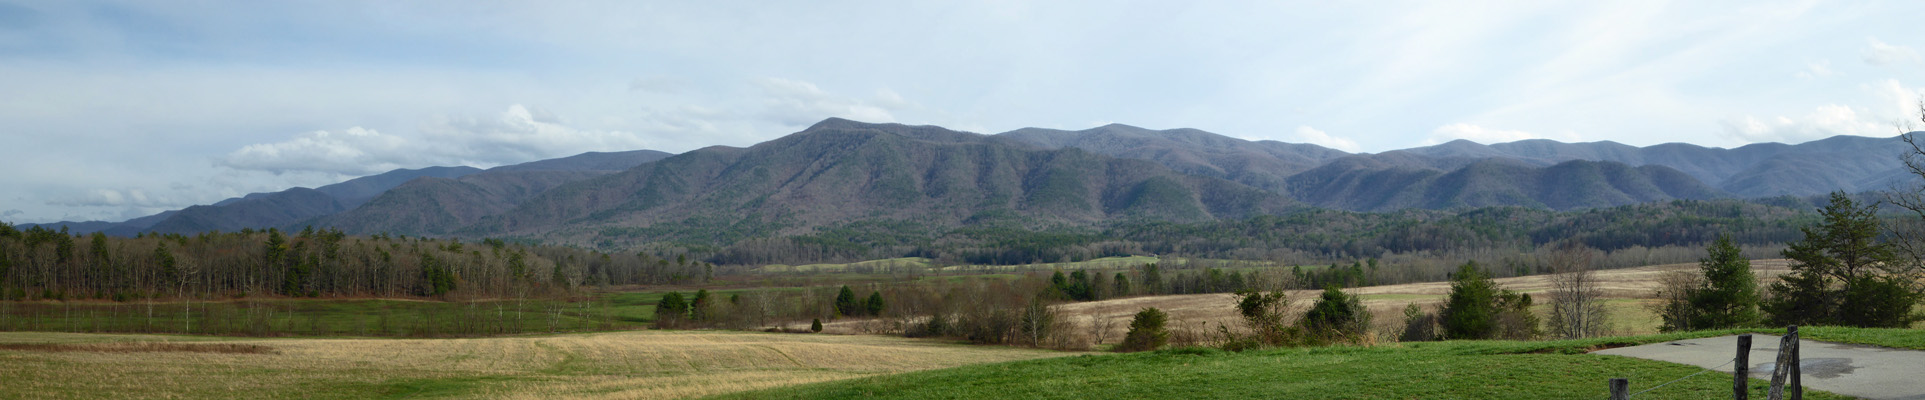 Great Smoky Mts Cades Cove